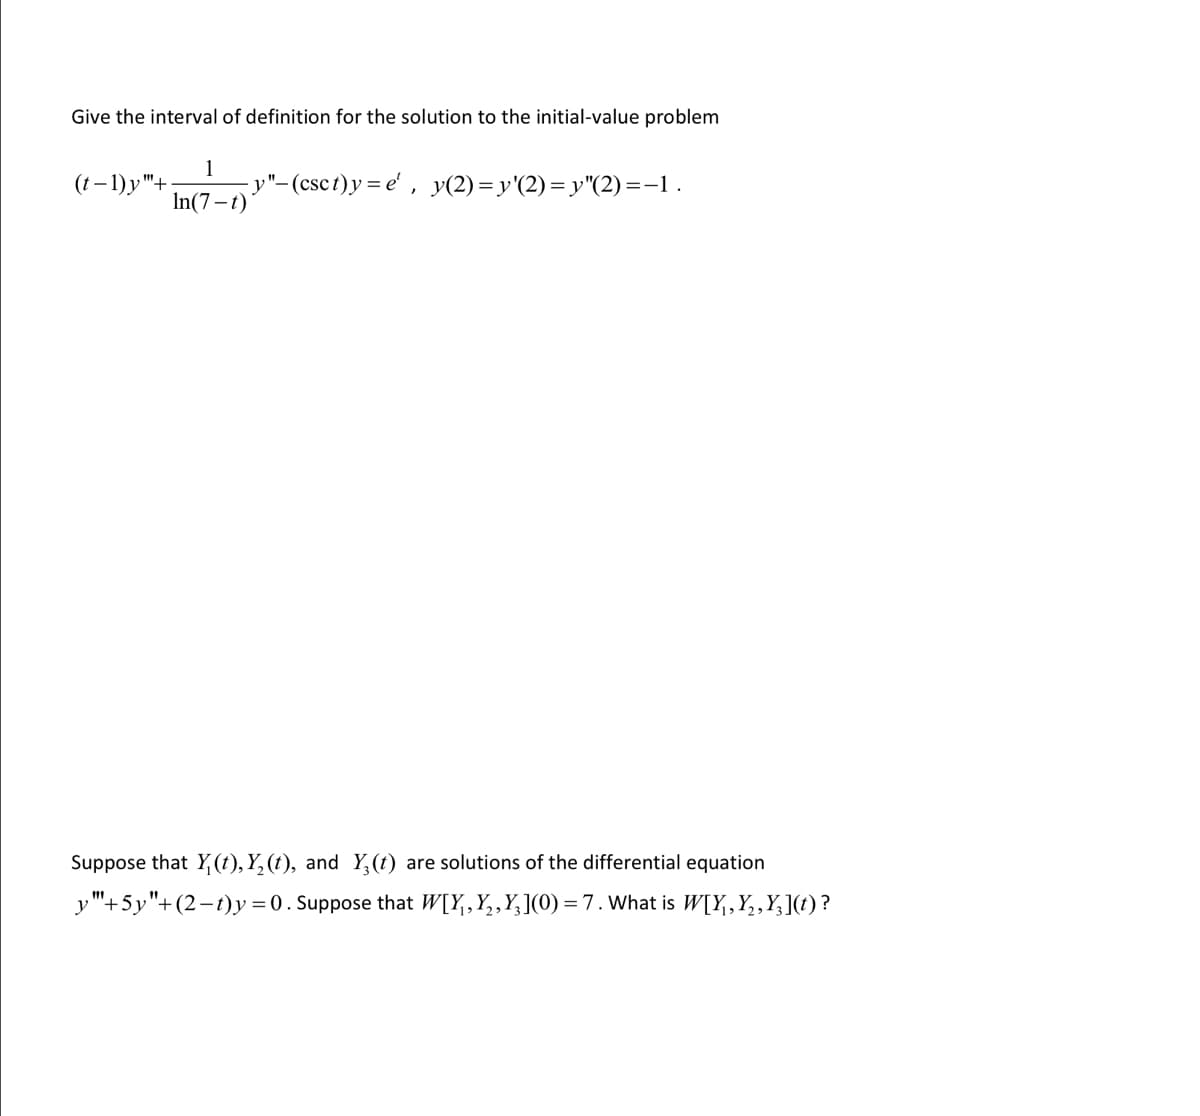 ### Initial-Value Problem and Solution

#### Problem Statement:
Give the interval of definition for the solution to the initial-value problem:

\[
(t - 1) y^{n+1} + \frac{1}{\ln(7 - t)} y'' - (\csc t) y = e^t, \quad y(2) = y'(2) = y''(2) = -1
\]

#### Additional Problem:
Suppose that \( Y_1(t), Y_2(t), \) and \( Y_3(t) \) are solutions of the differential equation:

\[
y''' + 5y'' + (2 - t)y = 0
\]

Given that:

\[
W[Y_1, Y_2, Y_3](0) = 7
\]

What is \( W[Y_1, Y_2, Y_3](t) \)?

#### Explanation of Concepts:
- The initial-value problem specifies a differential equation along with initial conditions at a particular point.
- The interval of definition refers to the range of the independent variable \( t \) for which the solution to the differential equation exists and is unique.
- The Wronskian, denoted by \( W[Y_1, Y_2, Y_3] \), is a determinant used in the study of differential equations to determine the linear independence of a set of solutions.

#### Detailed Steps:
1. **Interval of Definition:**
   - Analyze the equation by checking the continuity and differentiability of the coefficients and terms involved.
   - Determine where the terms might become undefined (e.g., \((t-1)\) imposes a singularity at \(t = 1\)).

2. **Calculating the Wronskian:**
   - The Wronskian \( W[Y_1, Y_2, Y_3](t) \) for solutions of the differential equation is obtained by evaluating the determinant of a matrix formed by these solutions and their derivatives.
   - Given \( W[Y_1, Y_2, Y_3](0) = 7 \), use the theory of linear differential equations to express \( W[Y_1, Y_2, Y_3](t) \) in terms of knowns.

This should provide a comprehensive guide for understanding the problem and the steps required to solve it.